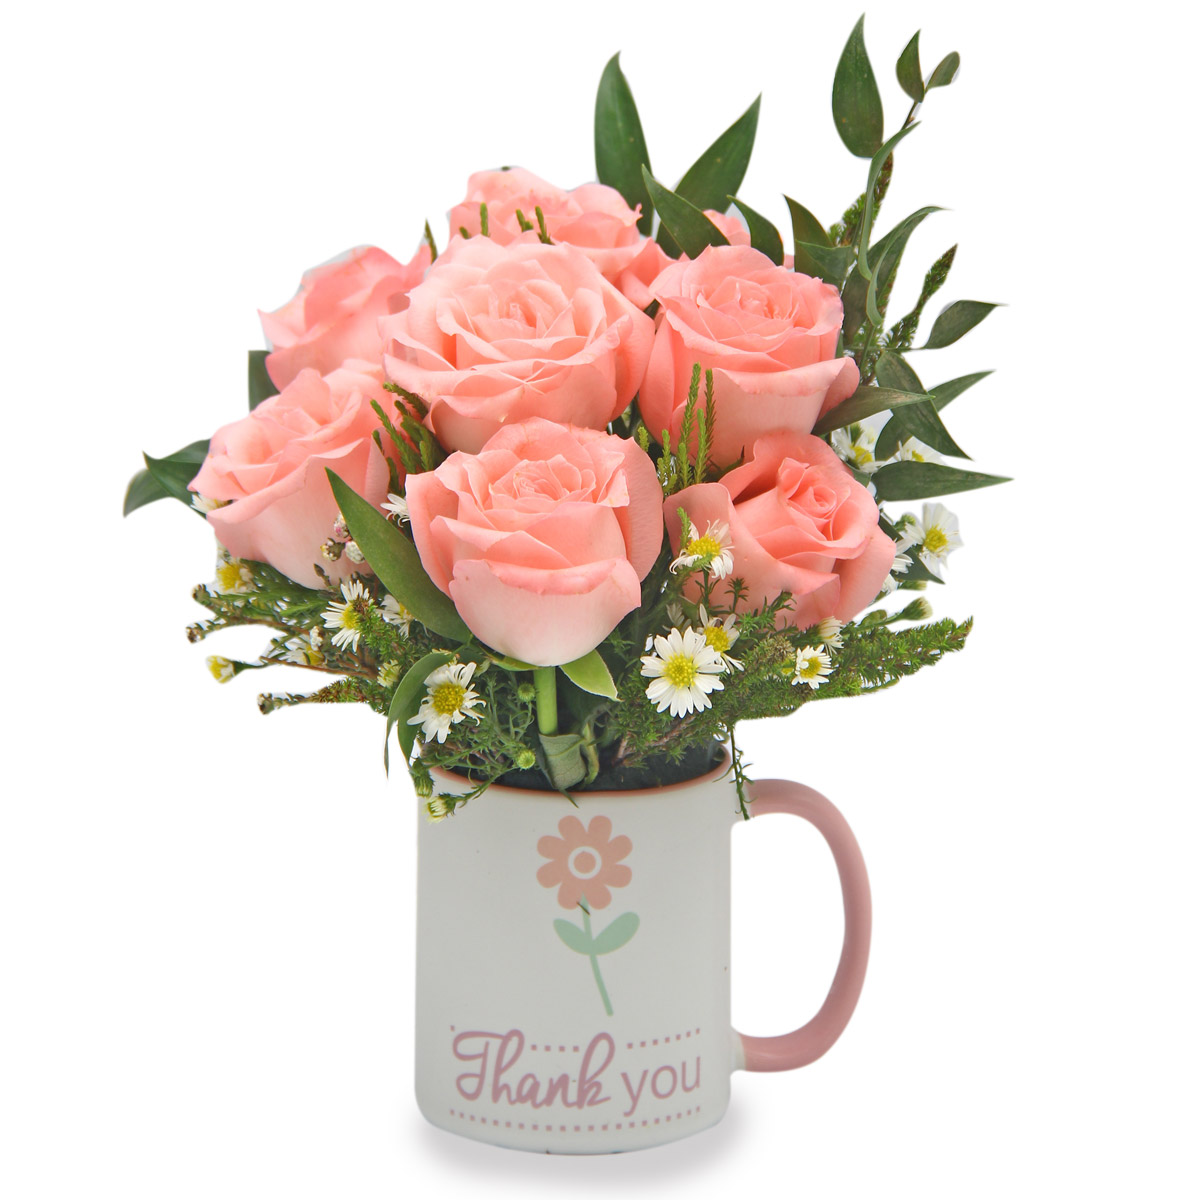 Sincerely Pleased (8 Pink Roses with 'Thank You' Mug)